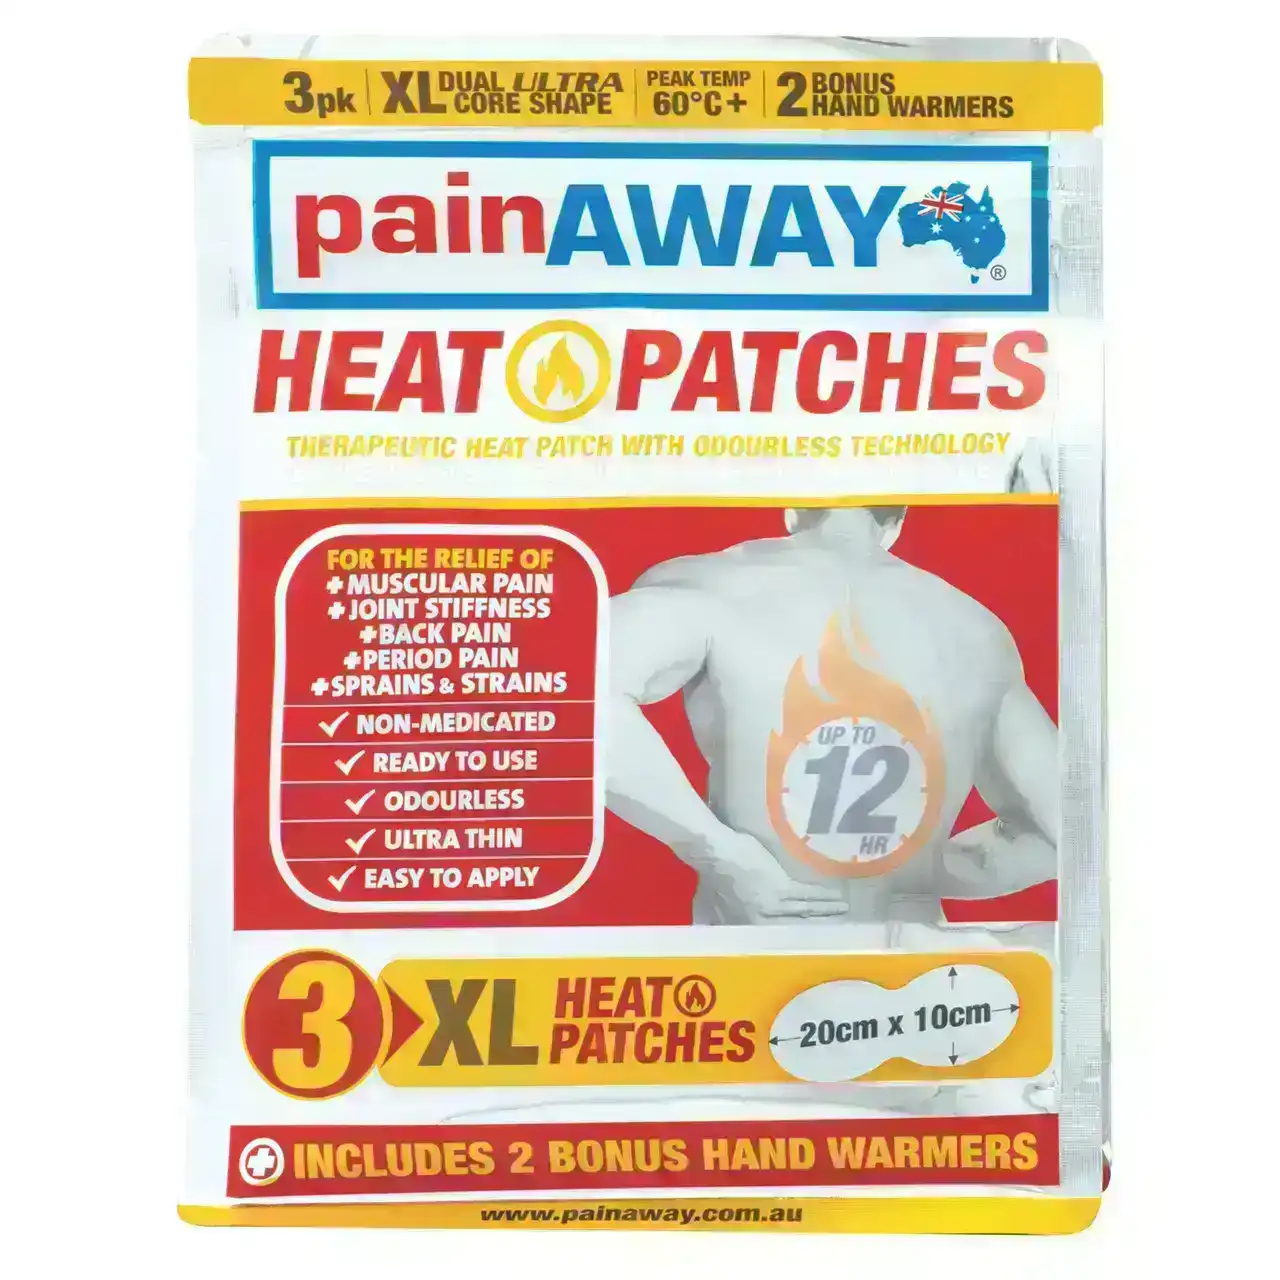 Pain Away XL Heat Patches 3 Pack